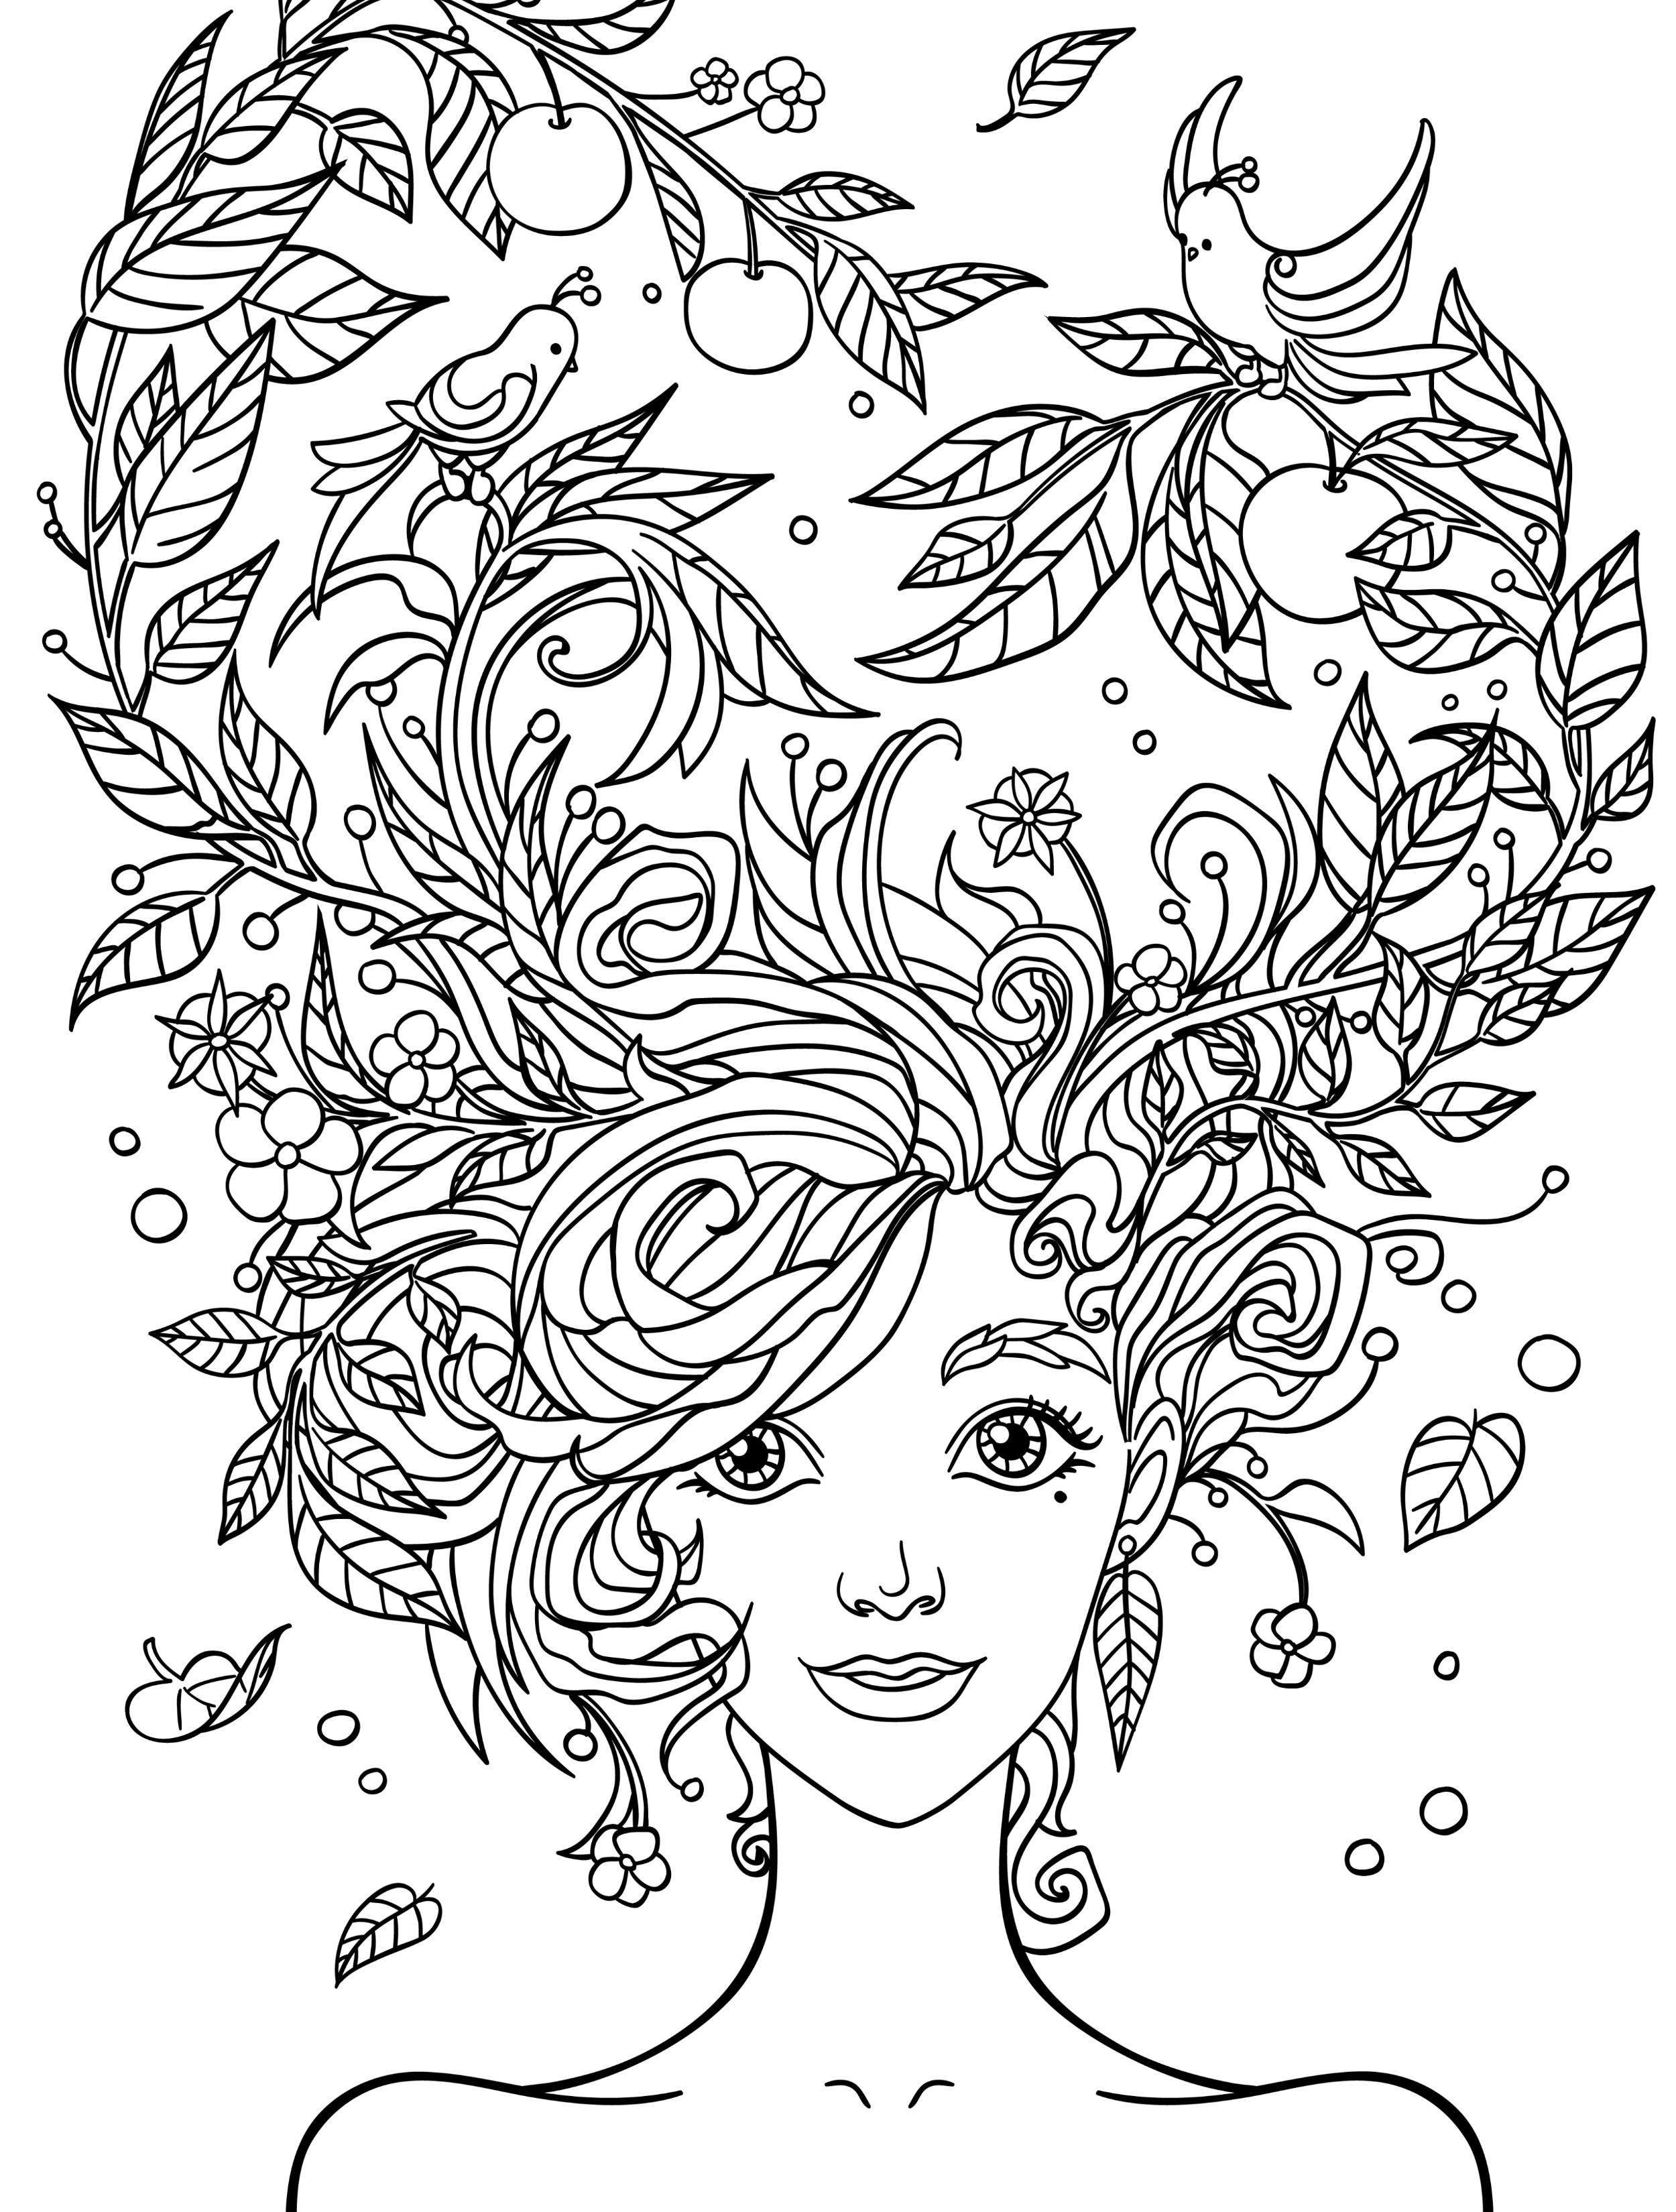 Coloring Pages Adults Girl
 10 Crazy Hair Adult Coloring Pages Page 5 of 12 Nerdy